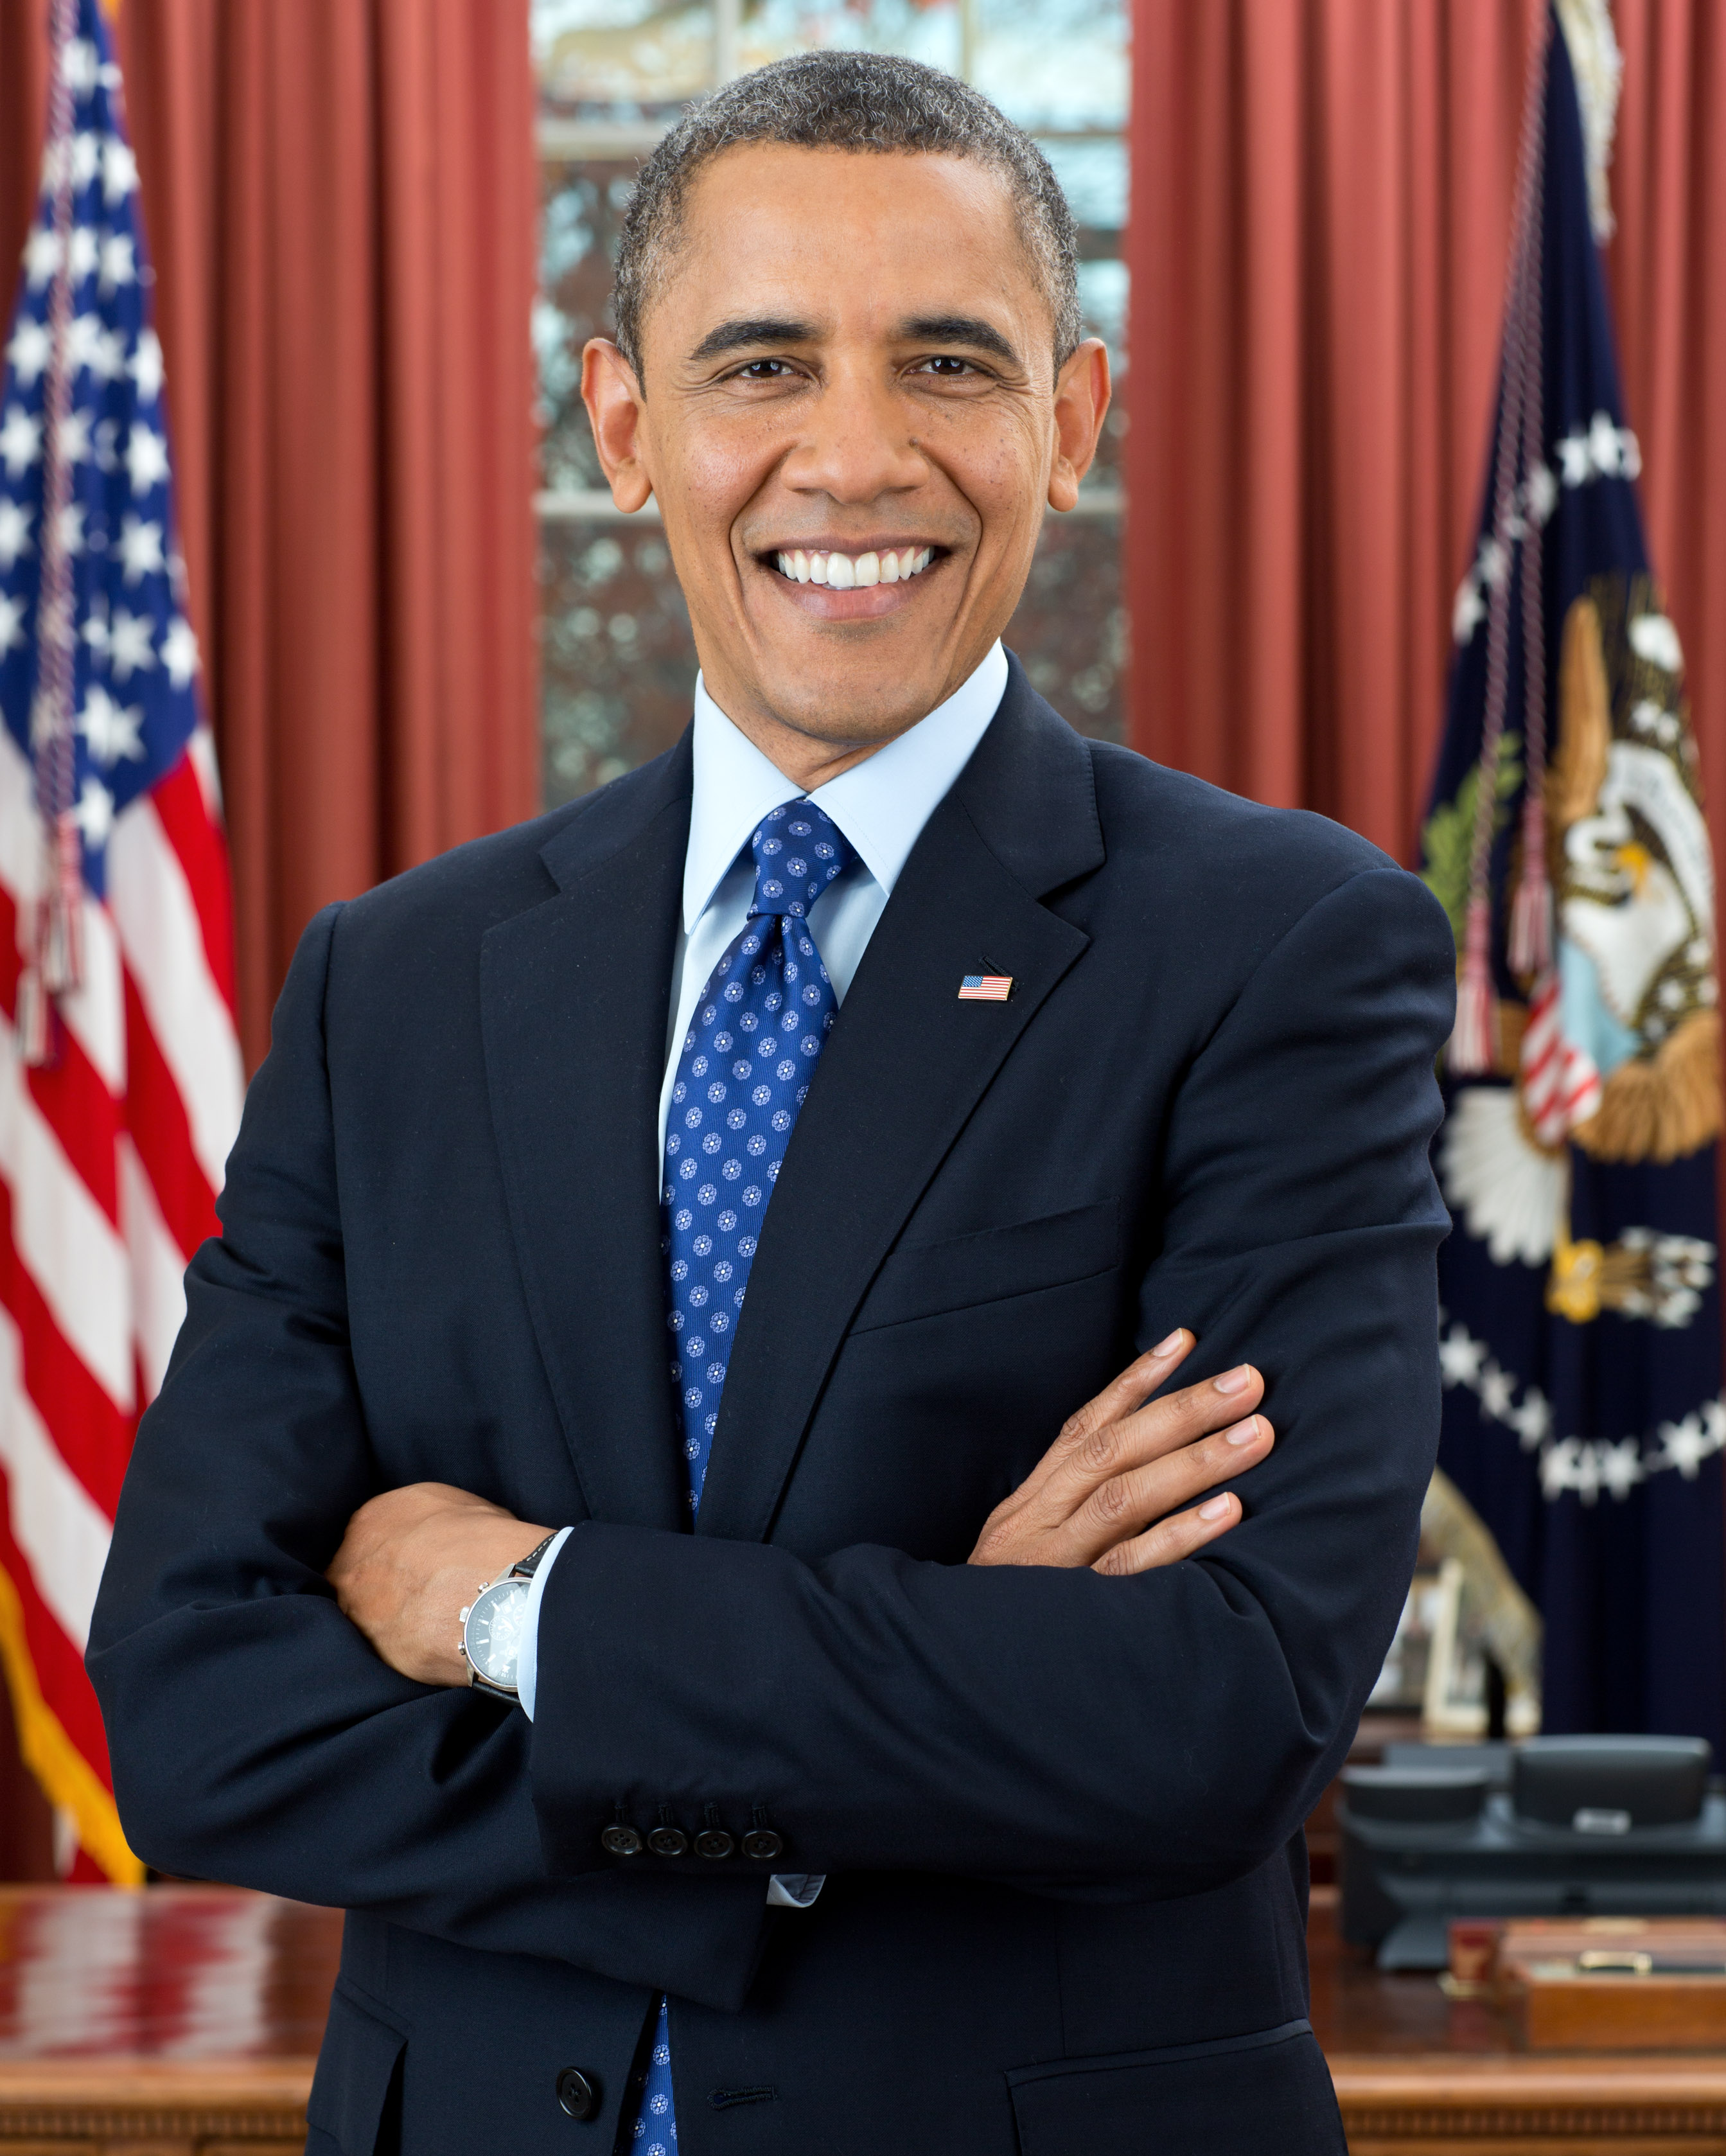 President Obama standing tall with his arms crossed and smiling in the Oval office of the White House.